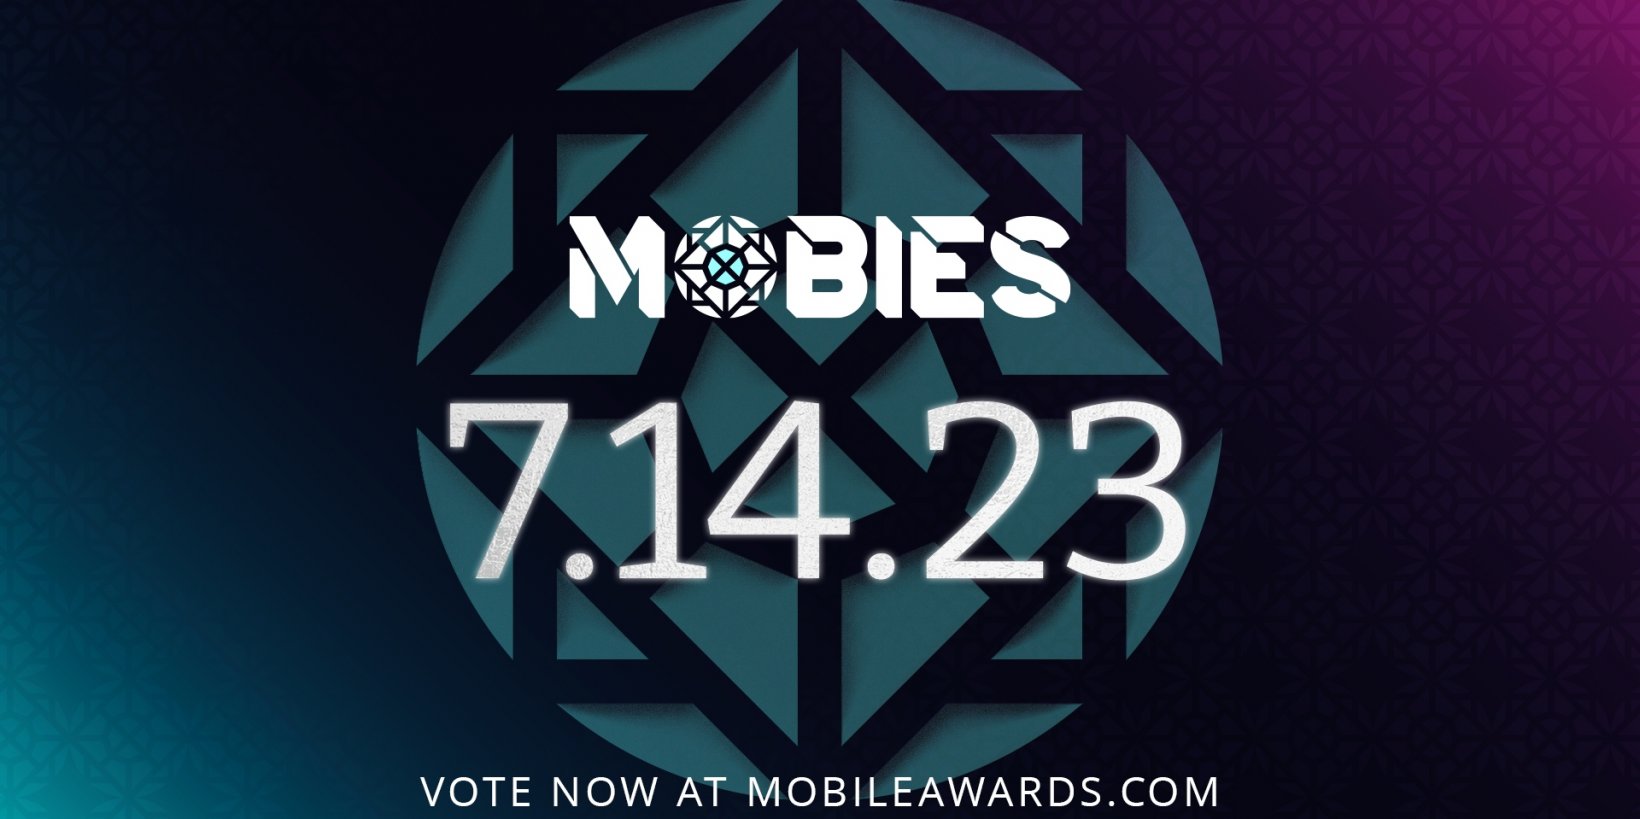 Vote for Pocket Gamer to win Coverage Platform of the Year at The Mobies mobile gaming awards